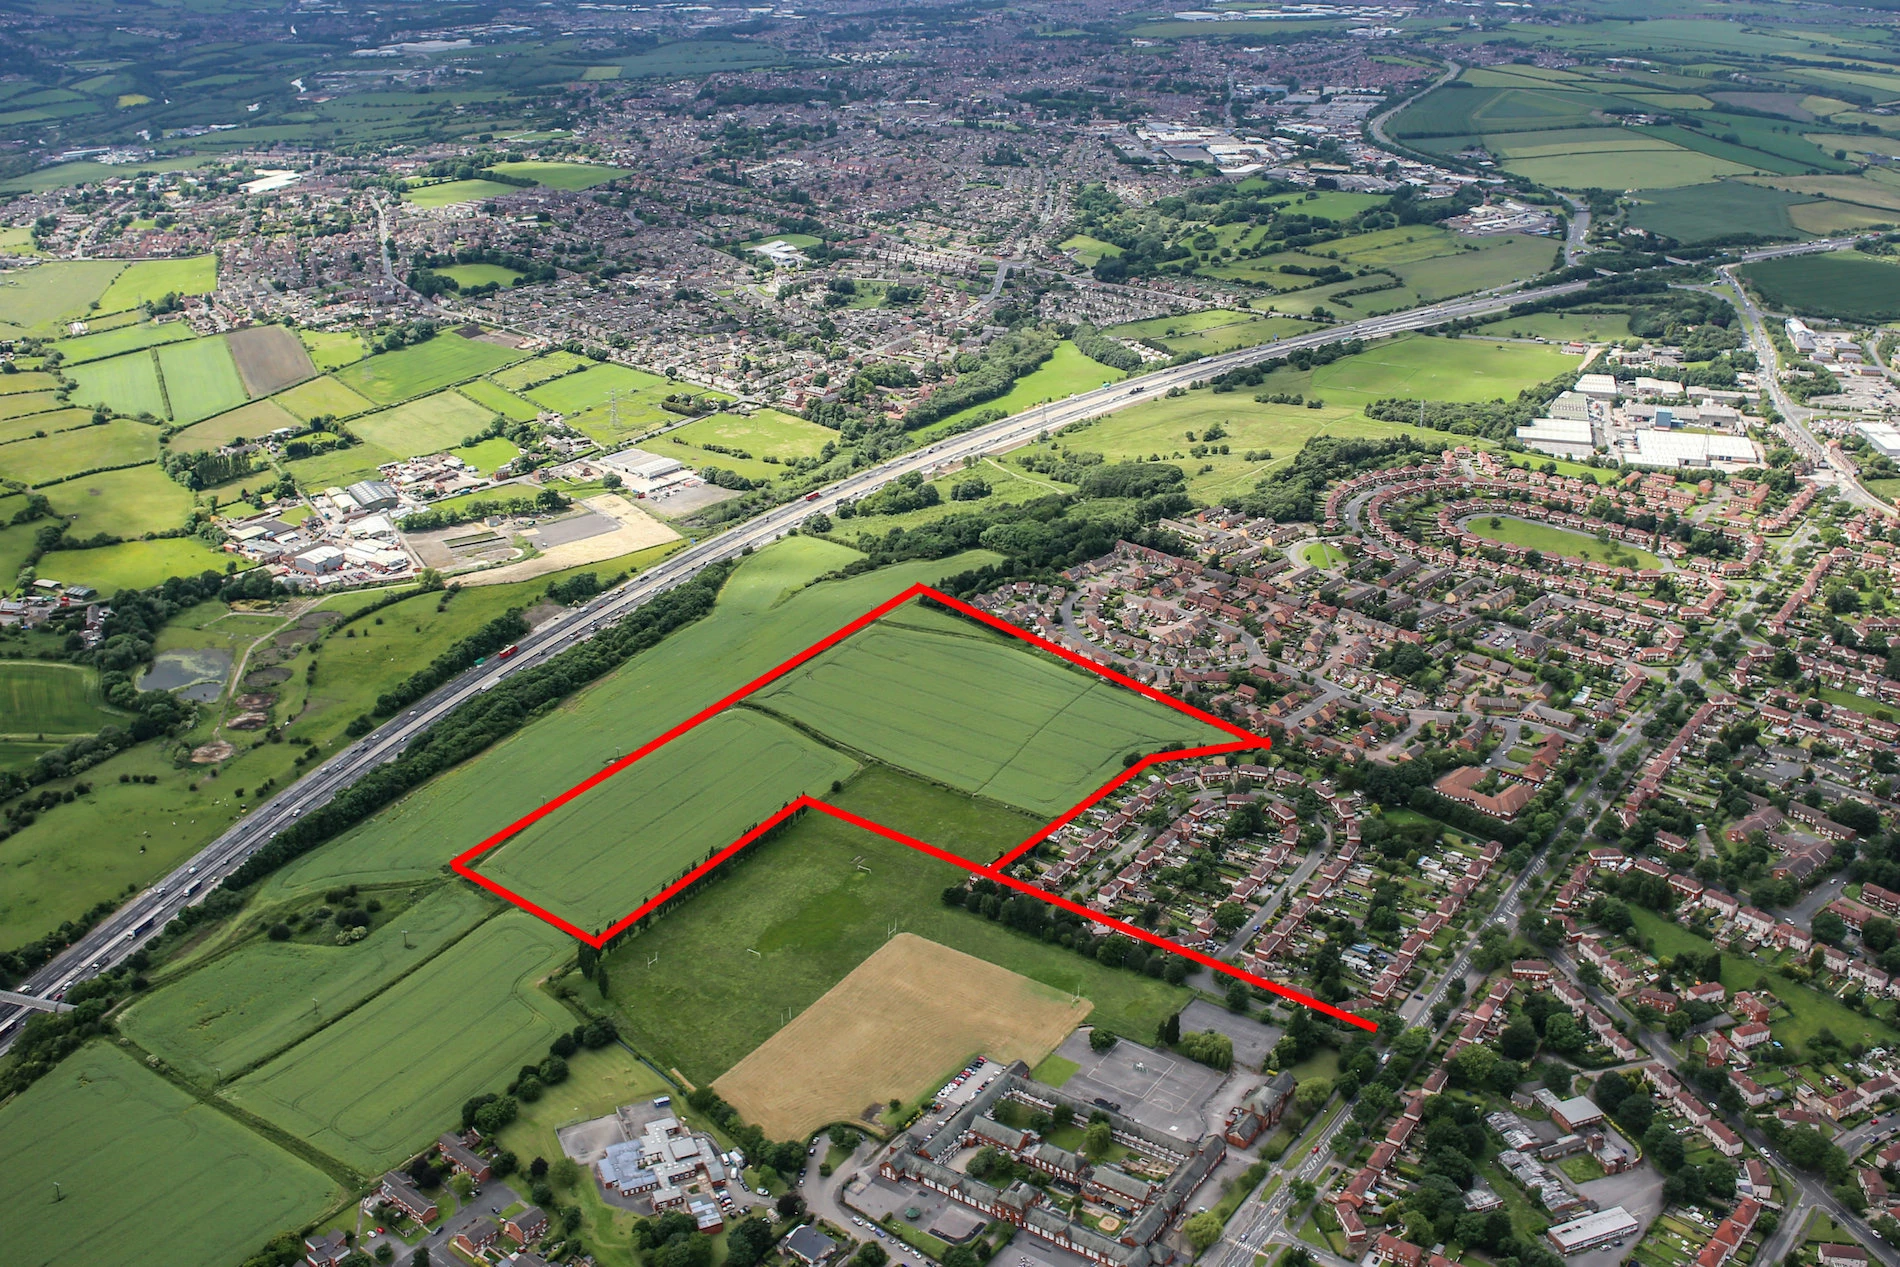 19.4 acres at Milton Road, Snapethorpe in Wakefield.